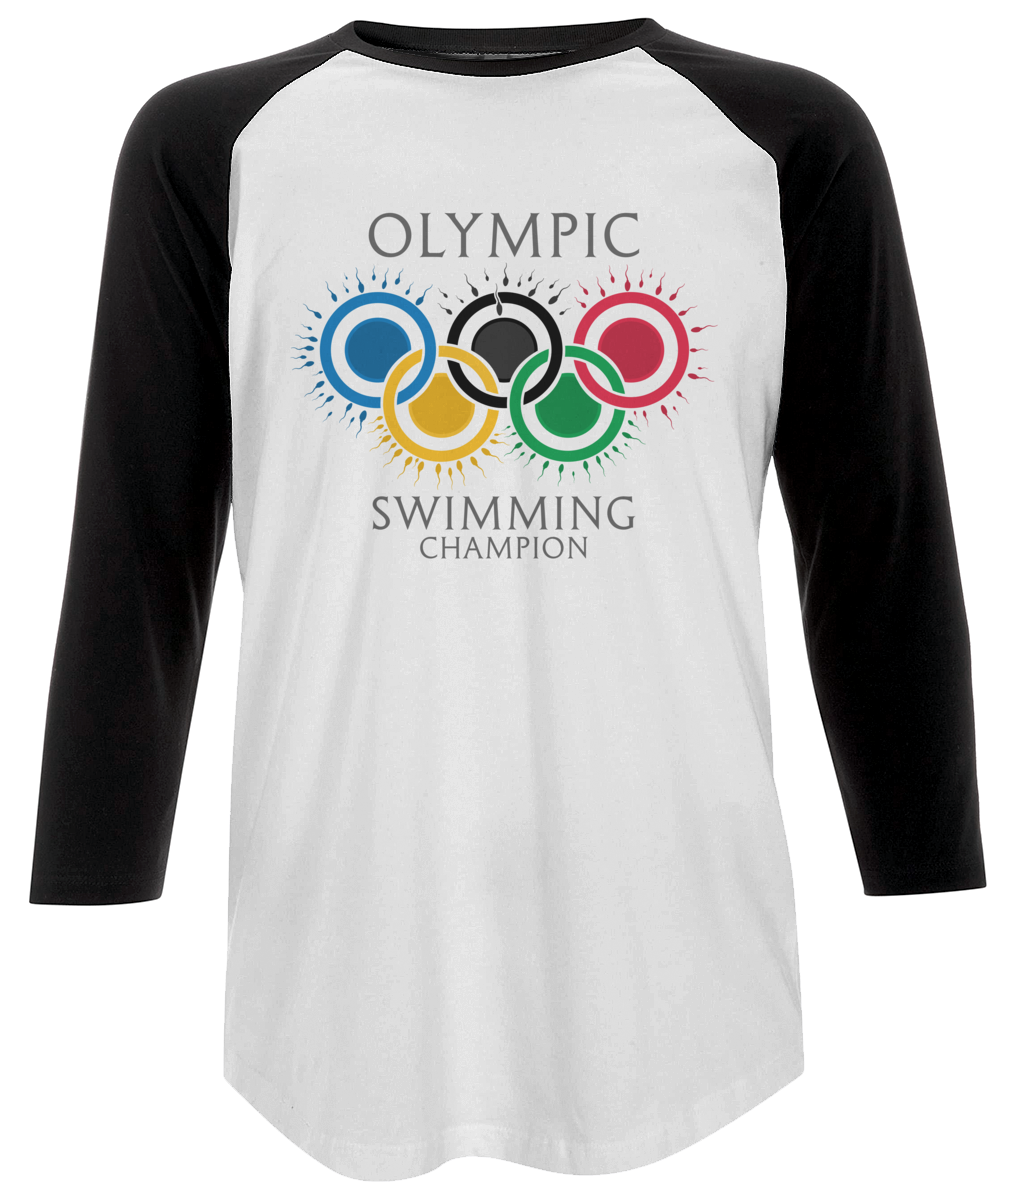 Olympic Swimming Champion top